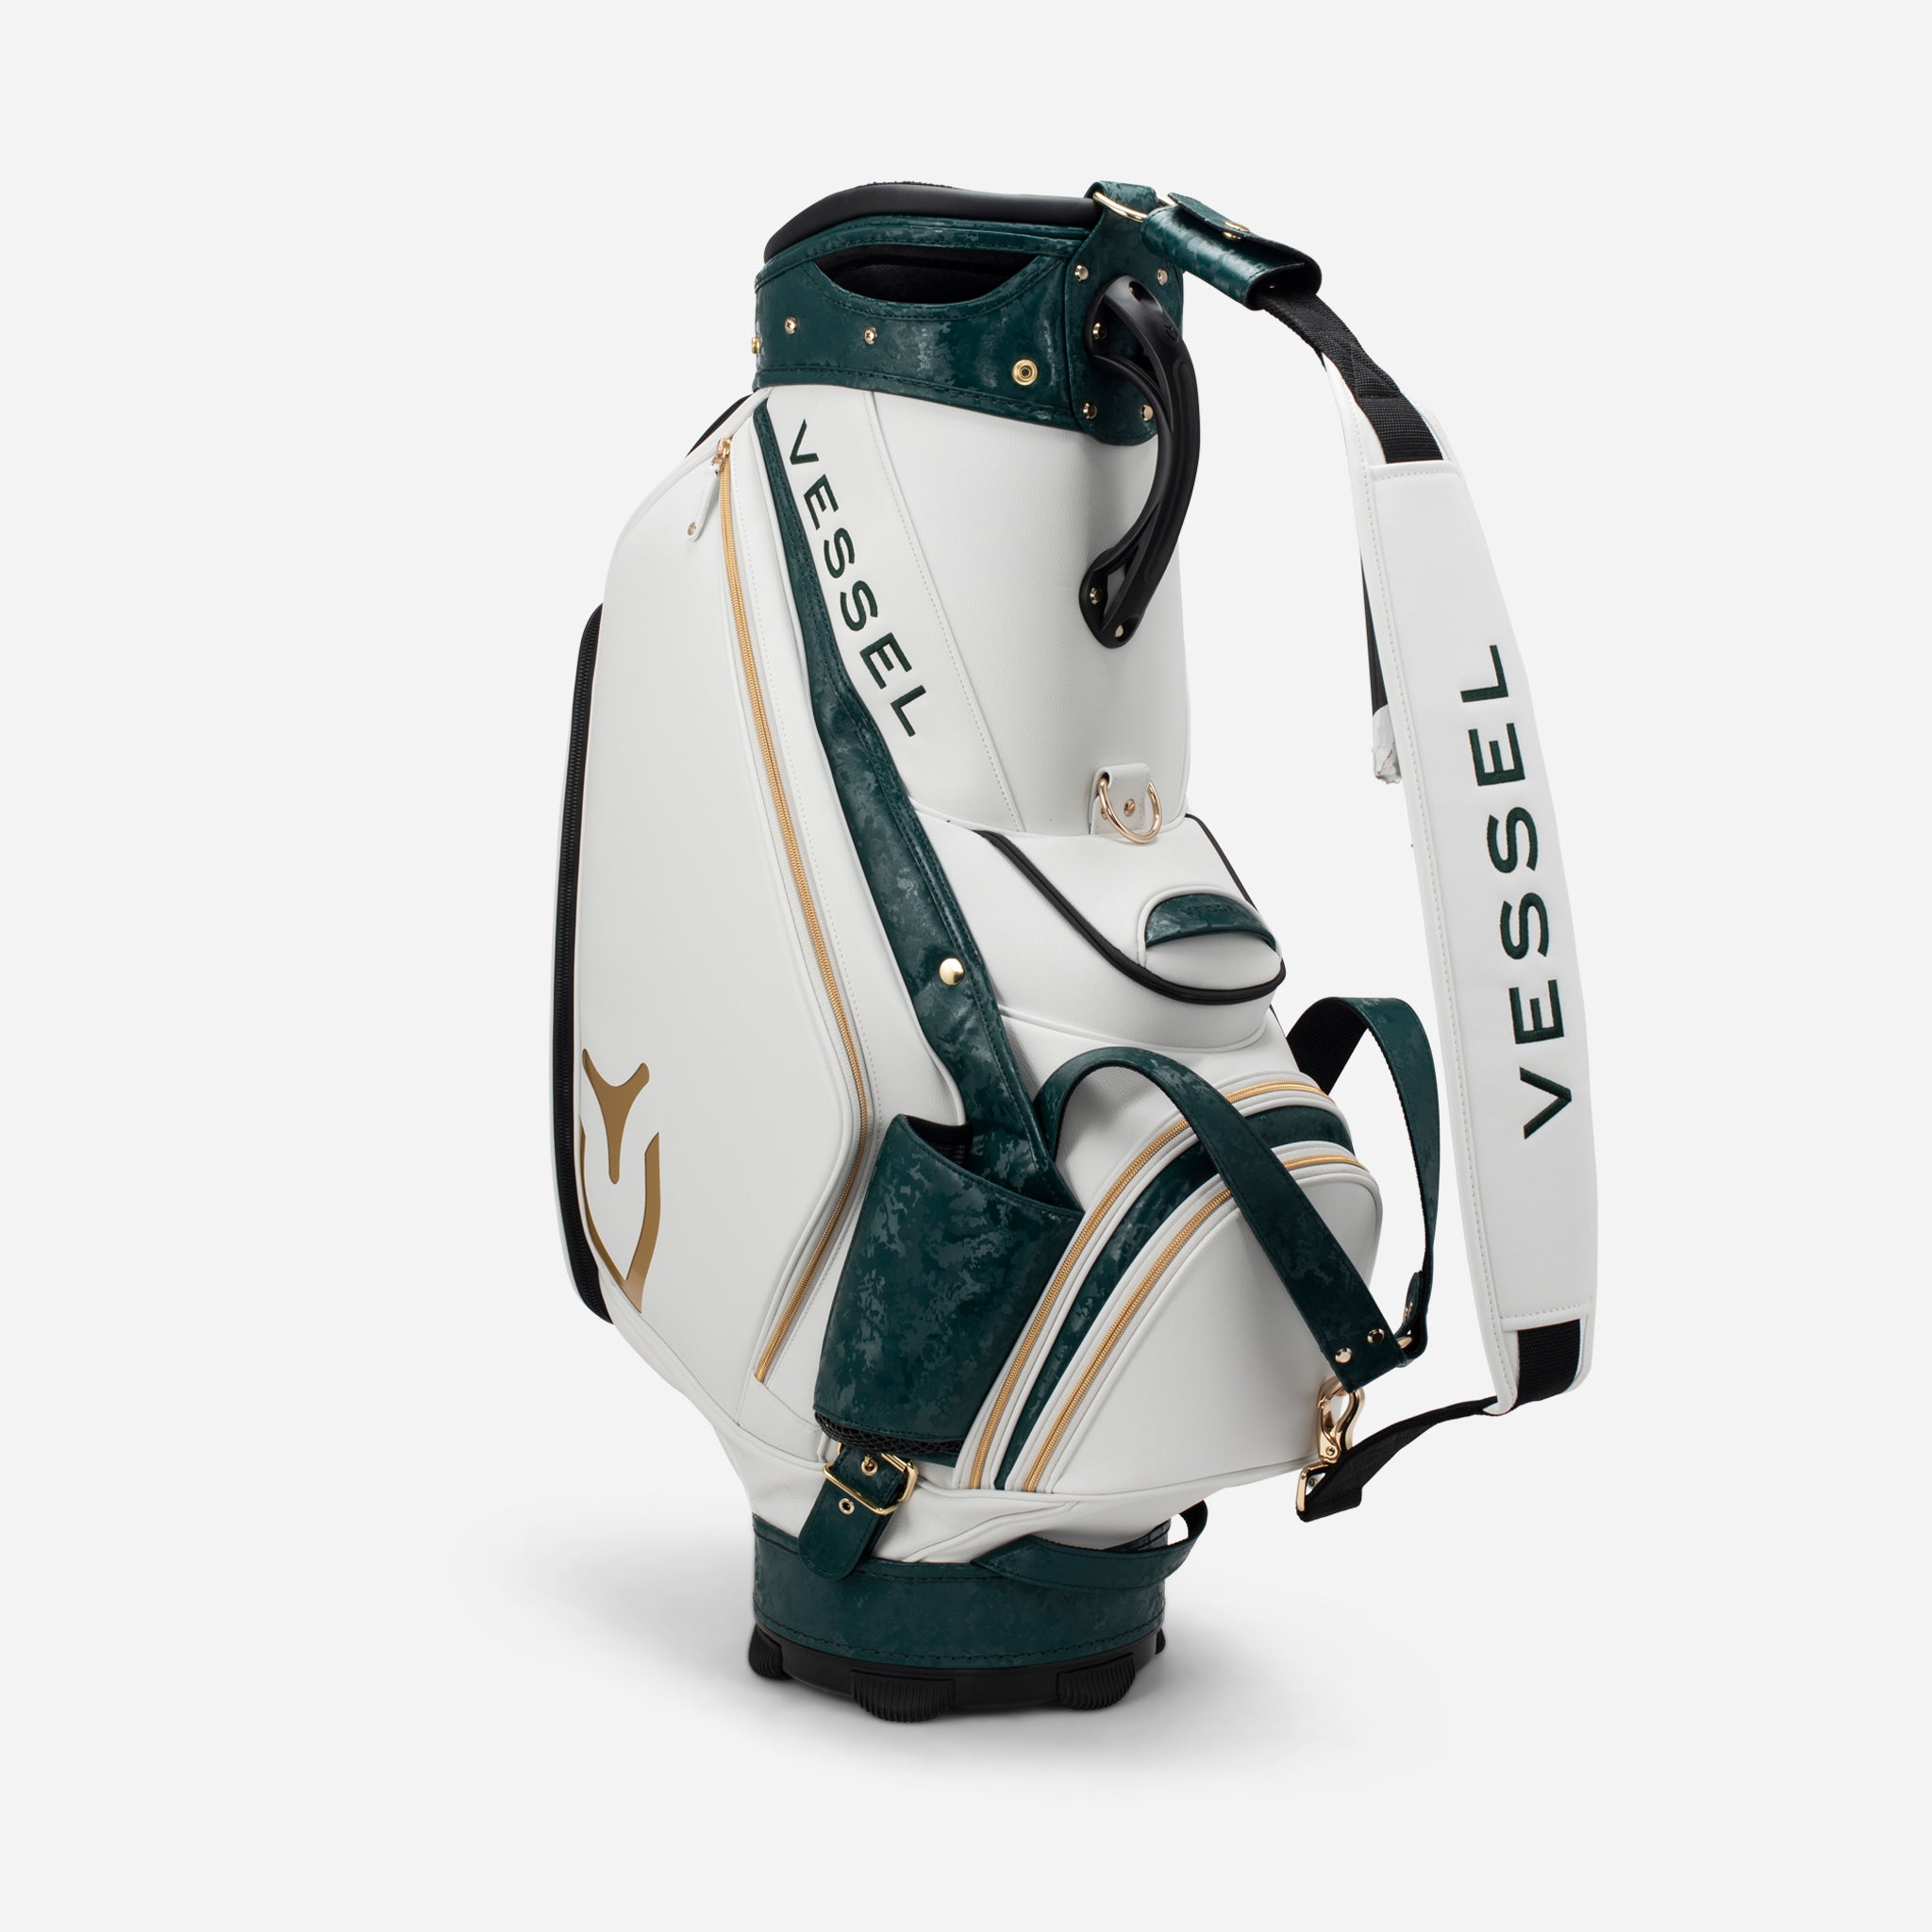 Vessel Golf - Experience tour performance with the Prime Staff bag